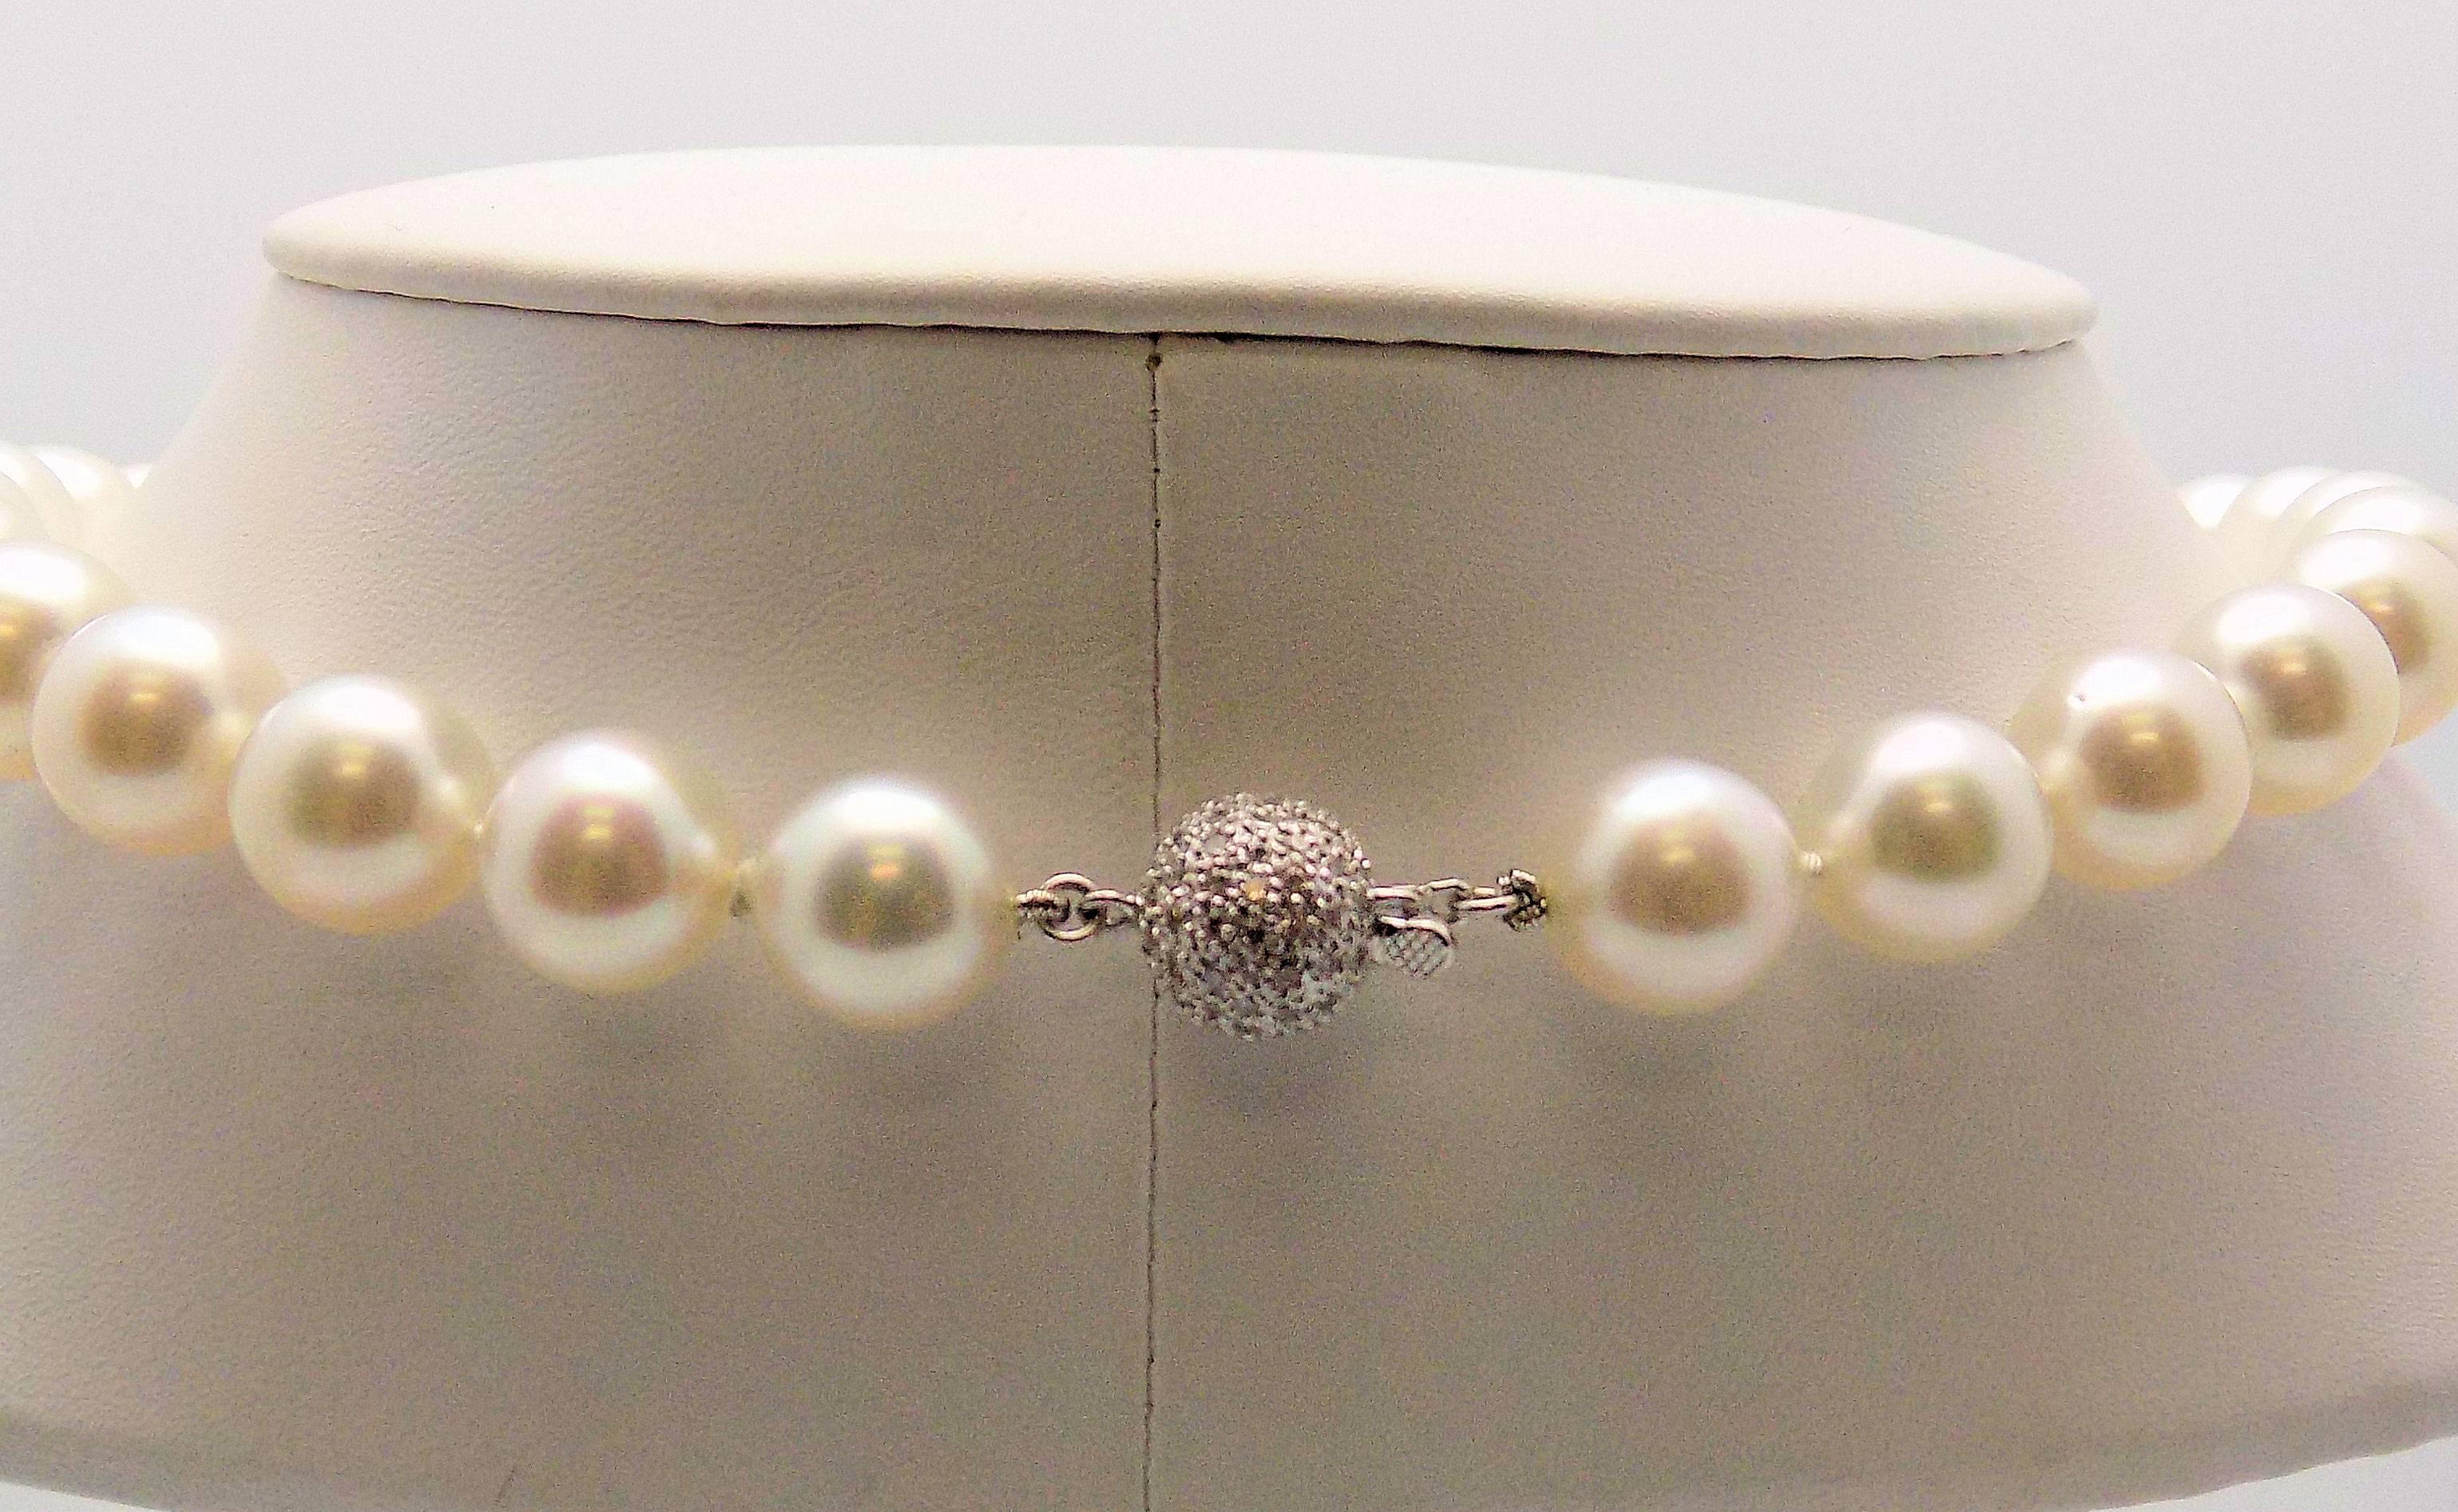 Strand South Sea Cultured Pearls with 18 Karat White Gold and Diamond Pavé Clasp In Excellent Condition For Sale In Dallas, TX